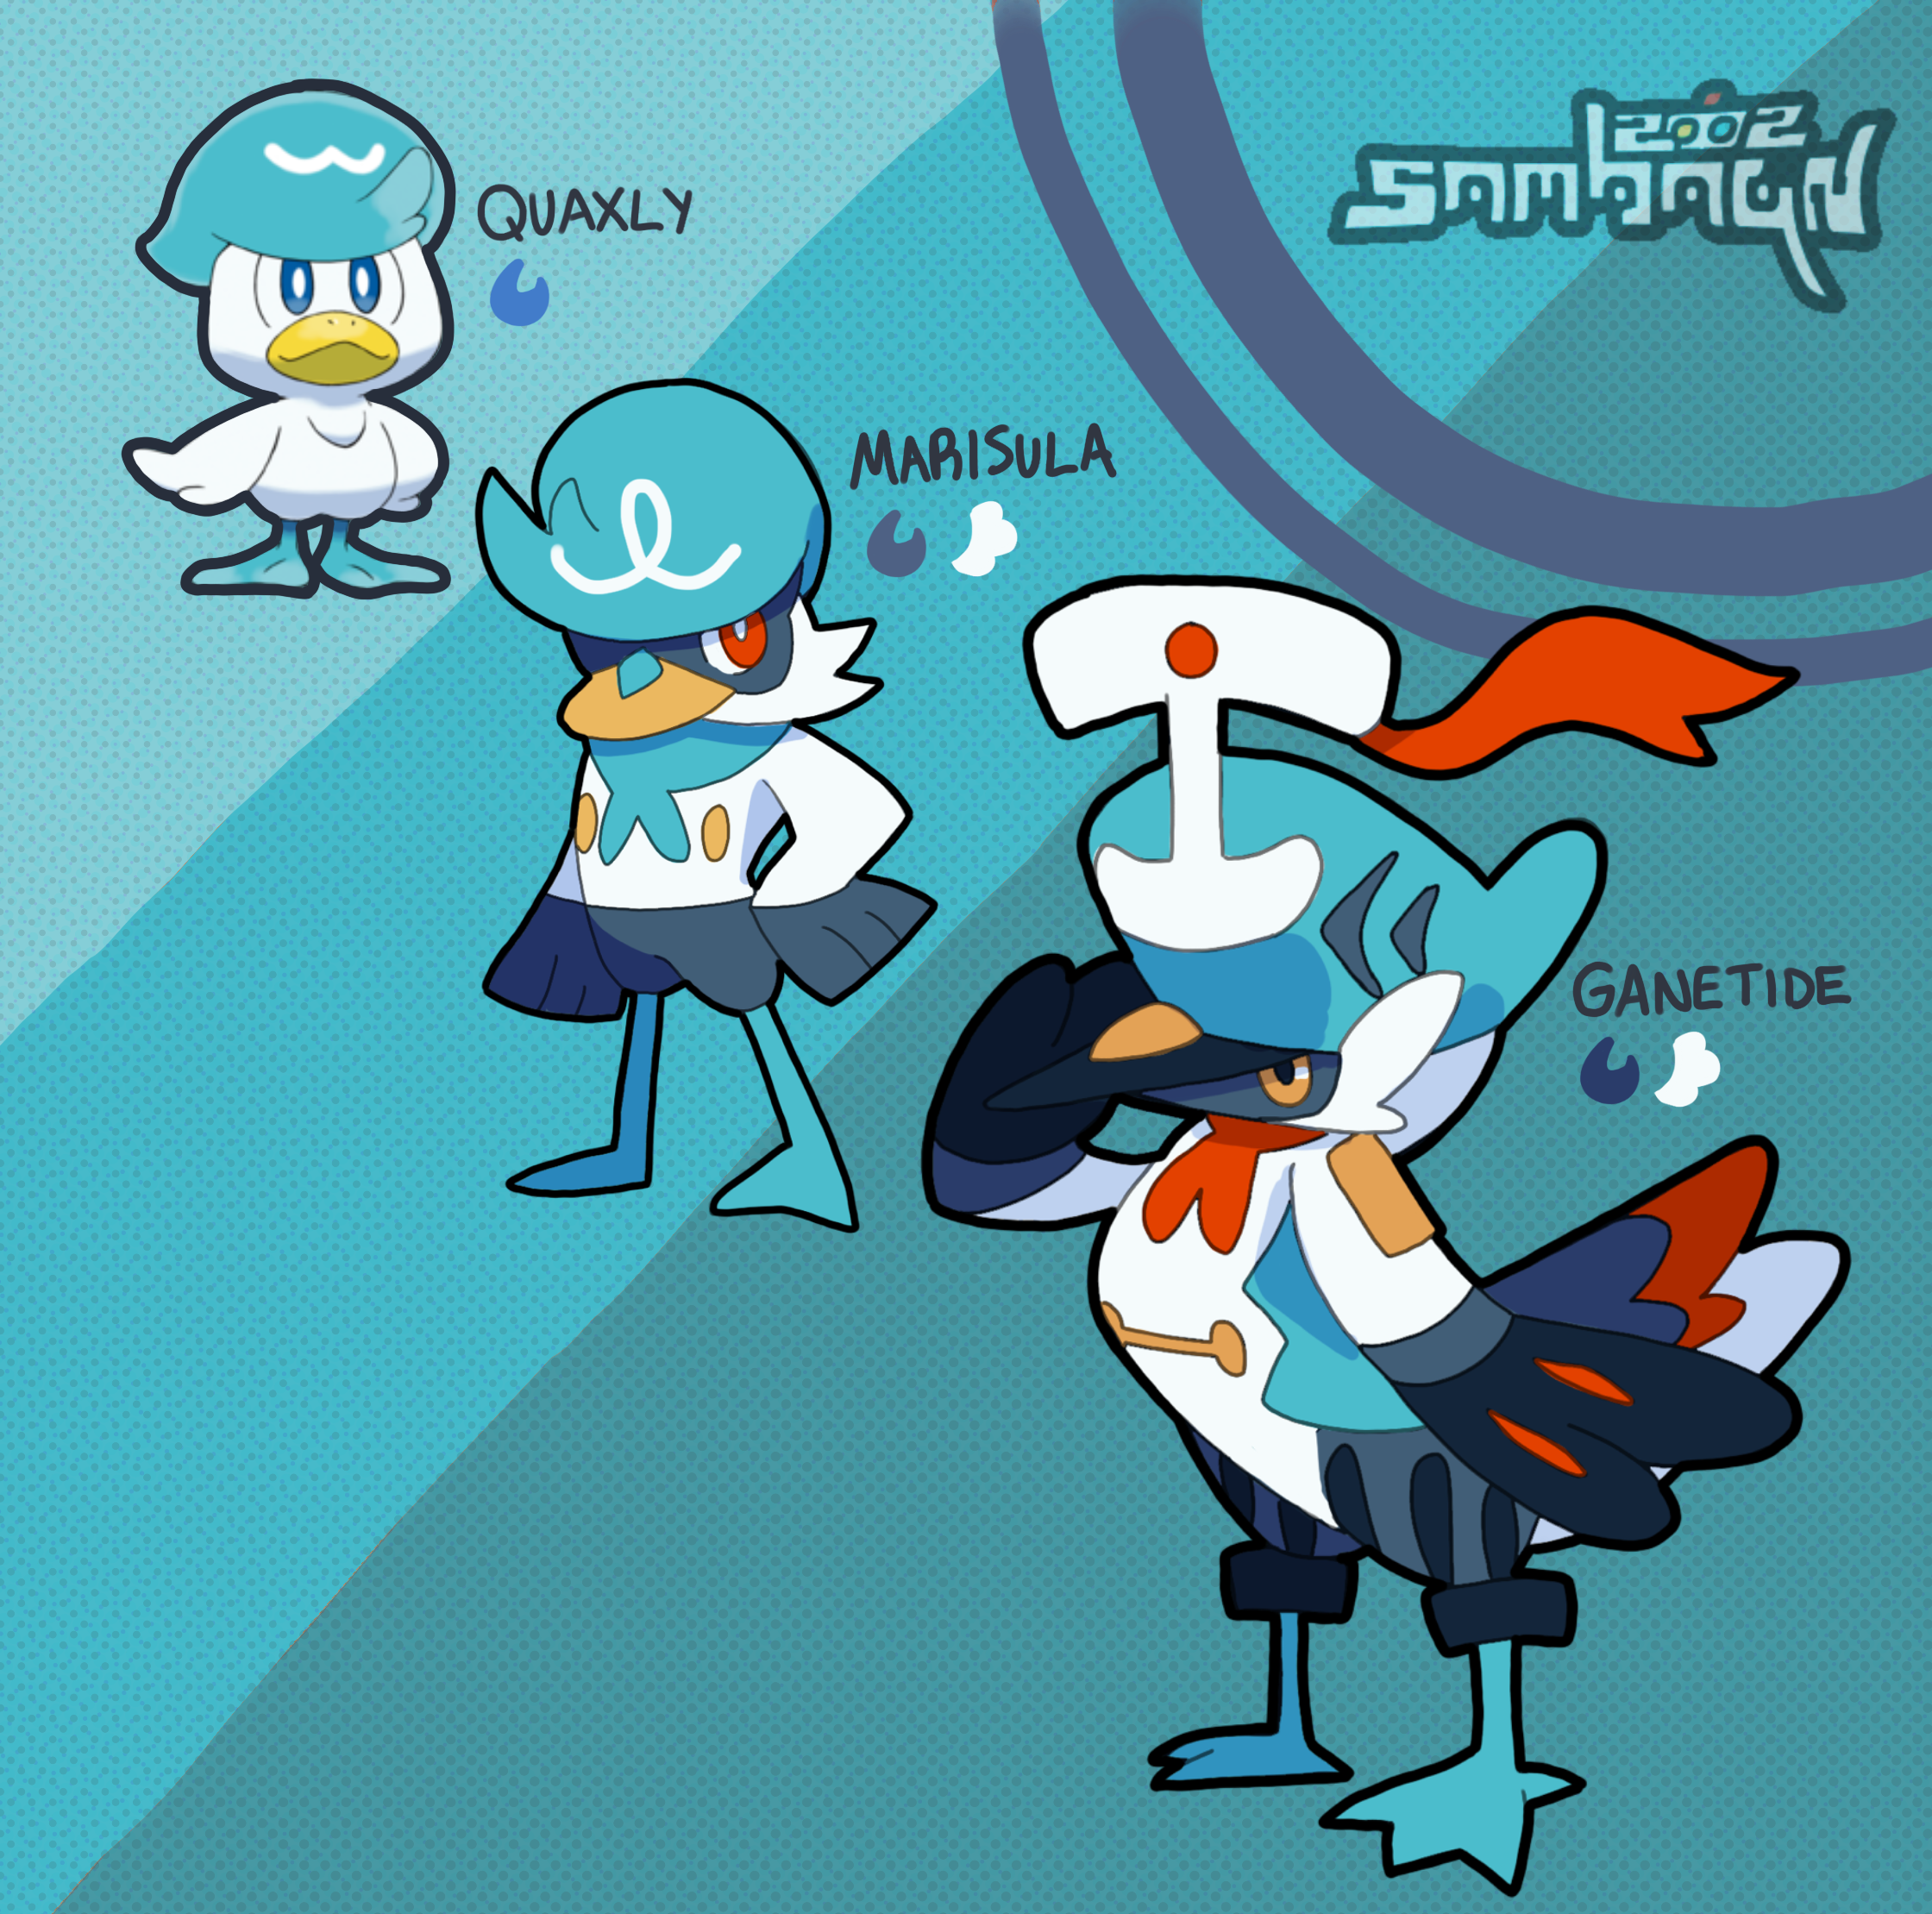 I created these designs before the real evolutions of the pokemon Quaxley were revealed. I expanded its water-type duck motif into a water/flying sula/ganet sailor. Done in 2022.